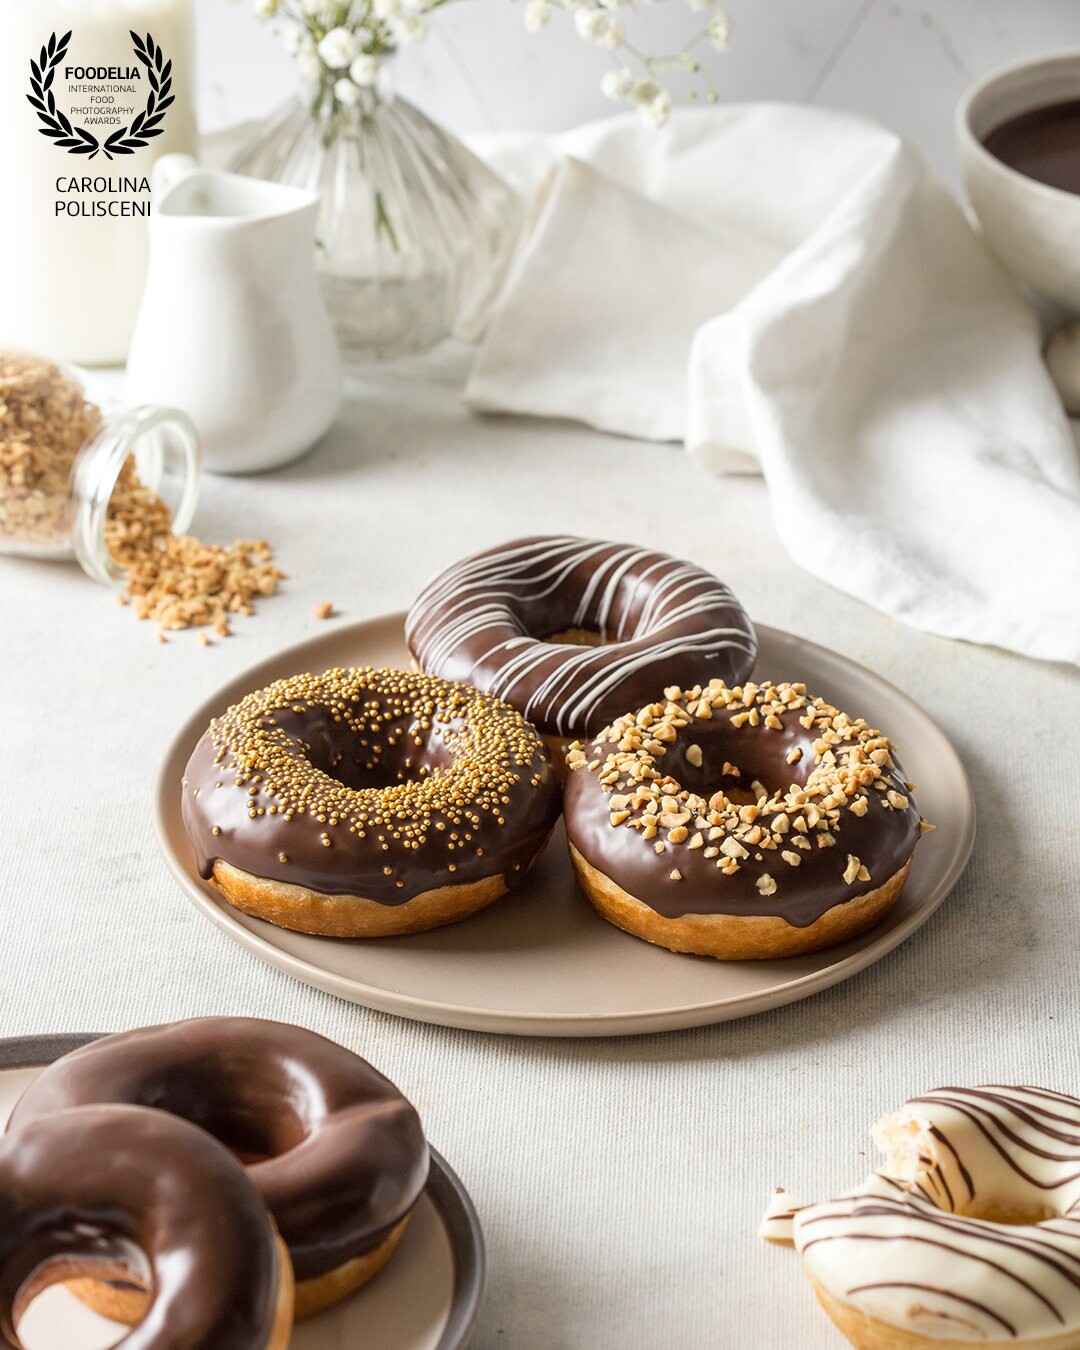 This photo was made for an international chocolate brand, the chef chocolatier made these incredible donuts for the shooting.<br />
The concept was ethereal and dreamy.